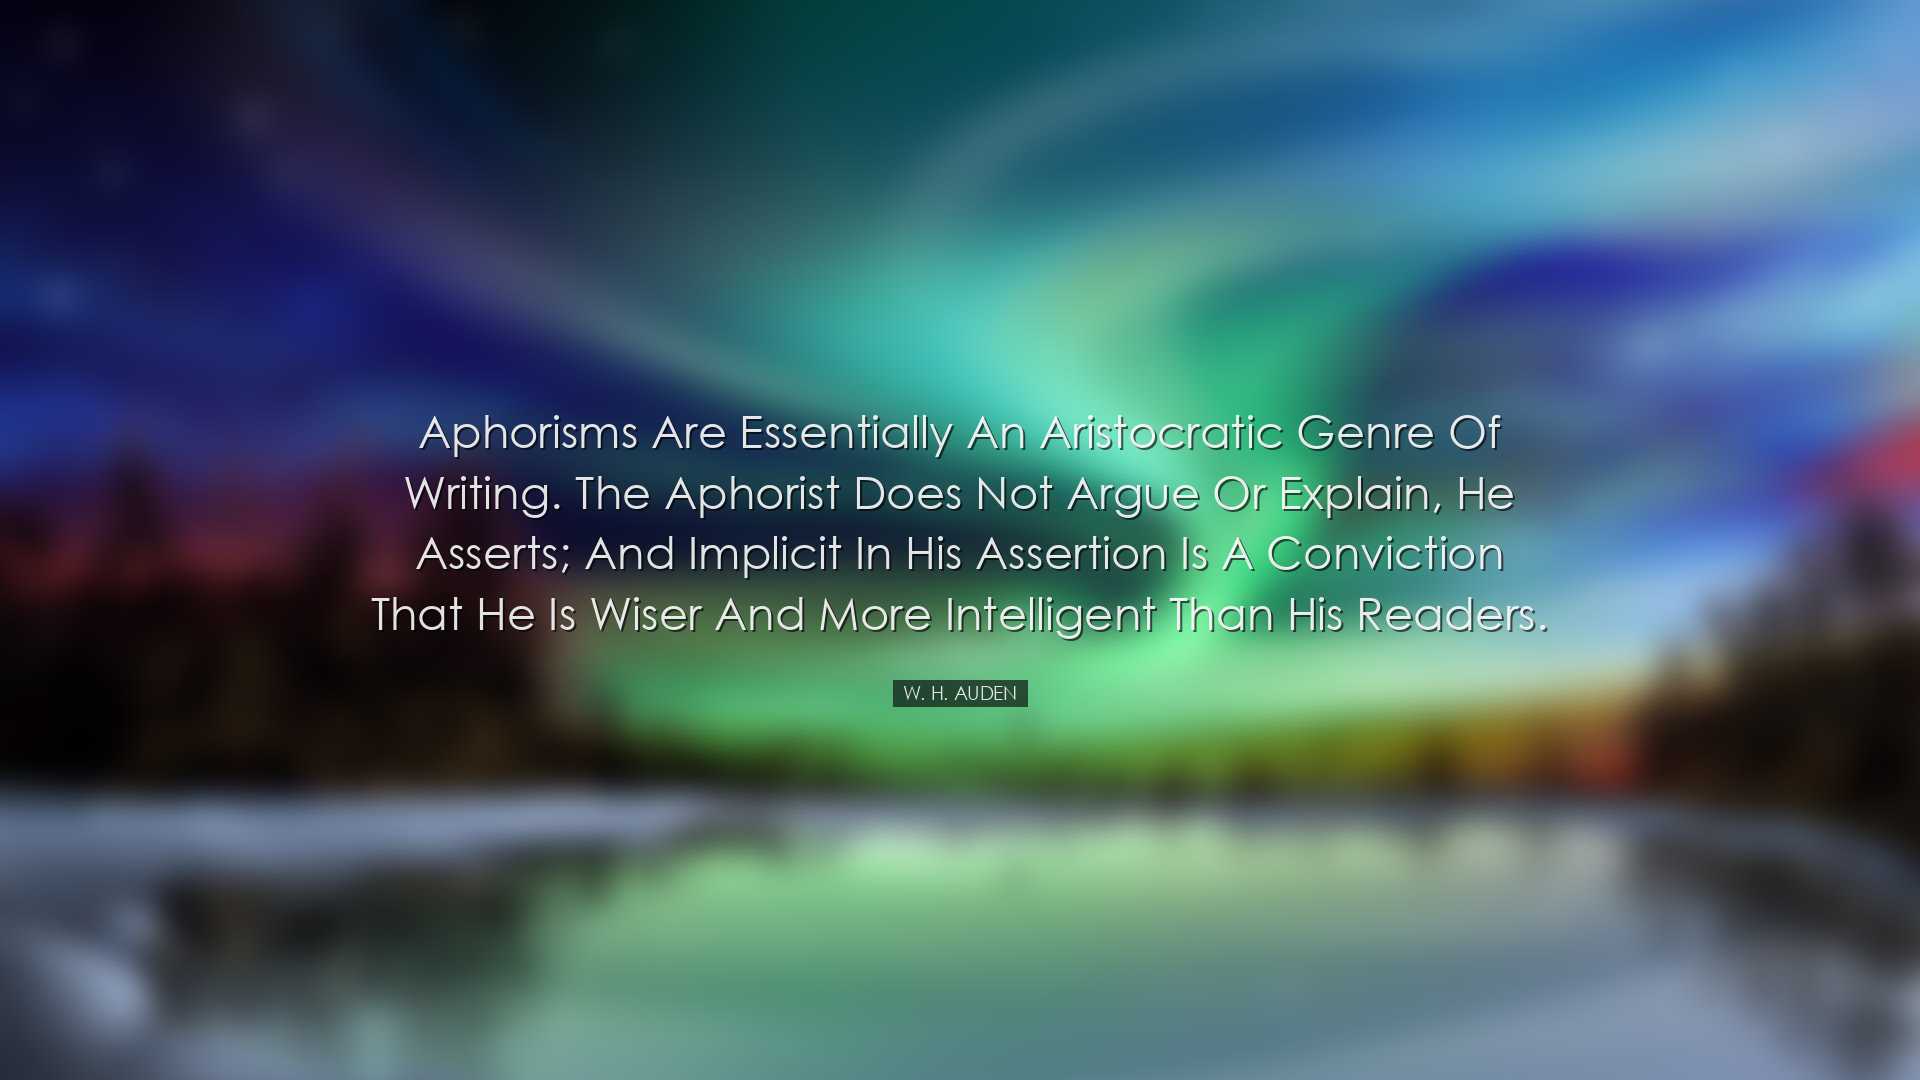 Aphorisms are essentially an aristocratic genre of writing. The ap